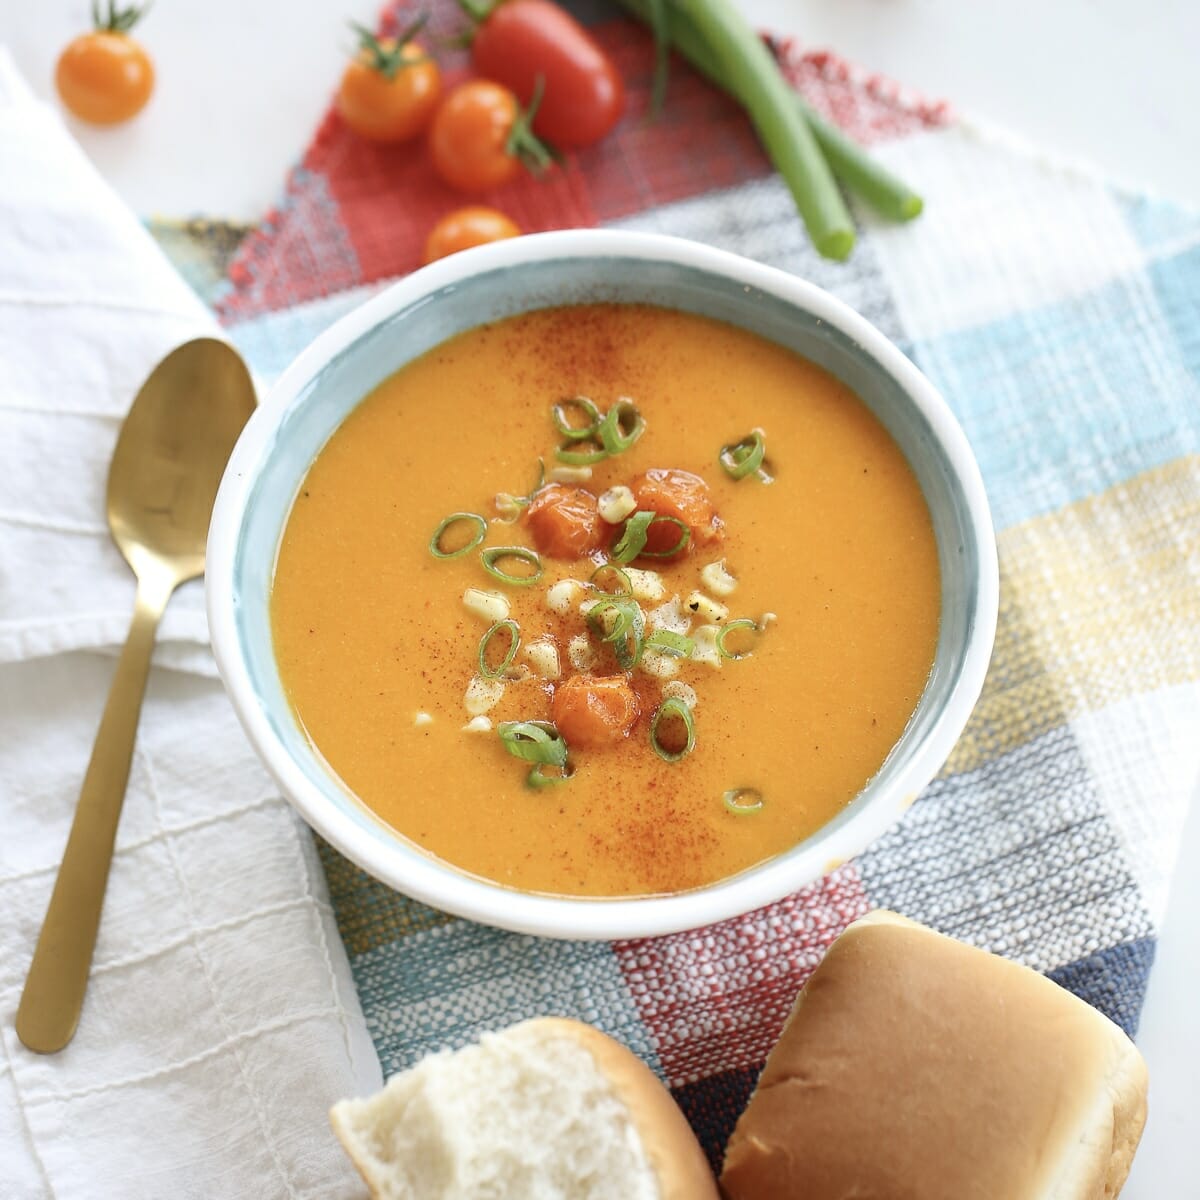 A bowl of roasted red pepper and tomato soup